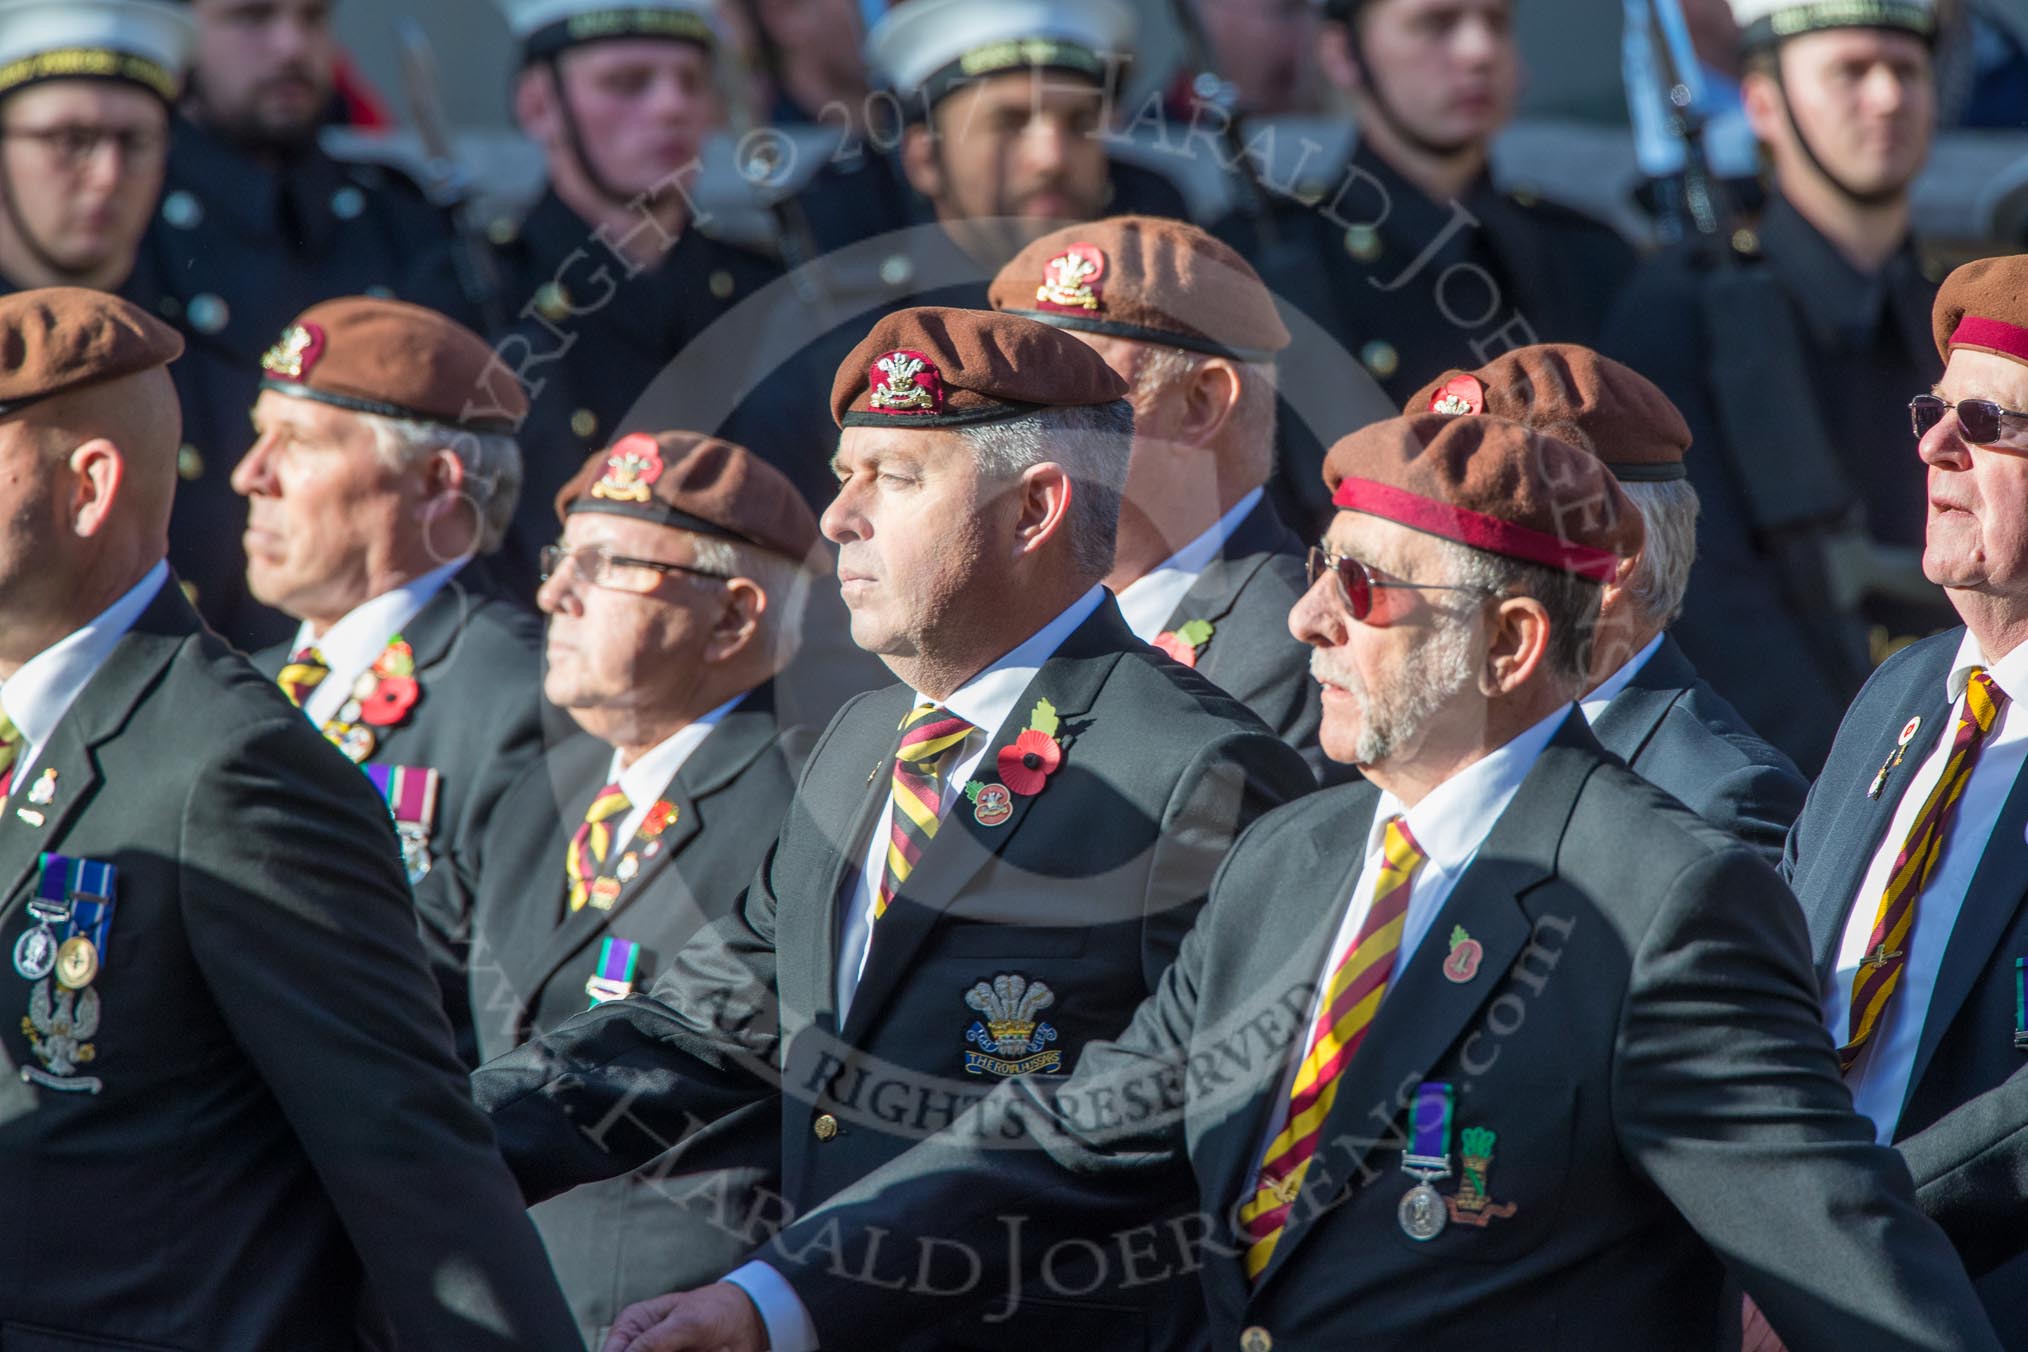 The King's Royal Hussars Regimental Association  (Group B21, 100 members) during the Royal British Legion March Past on Remembrance Sunday at the Cenotaph, Whitehall, Westminster, London, 11 November 2018, 12:10.